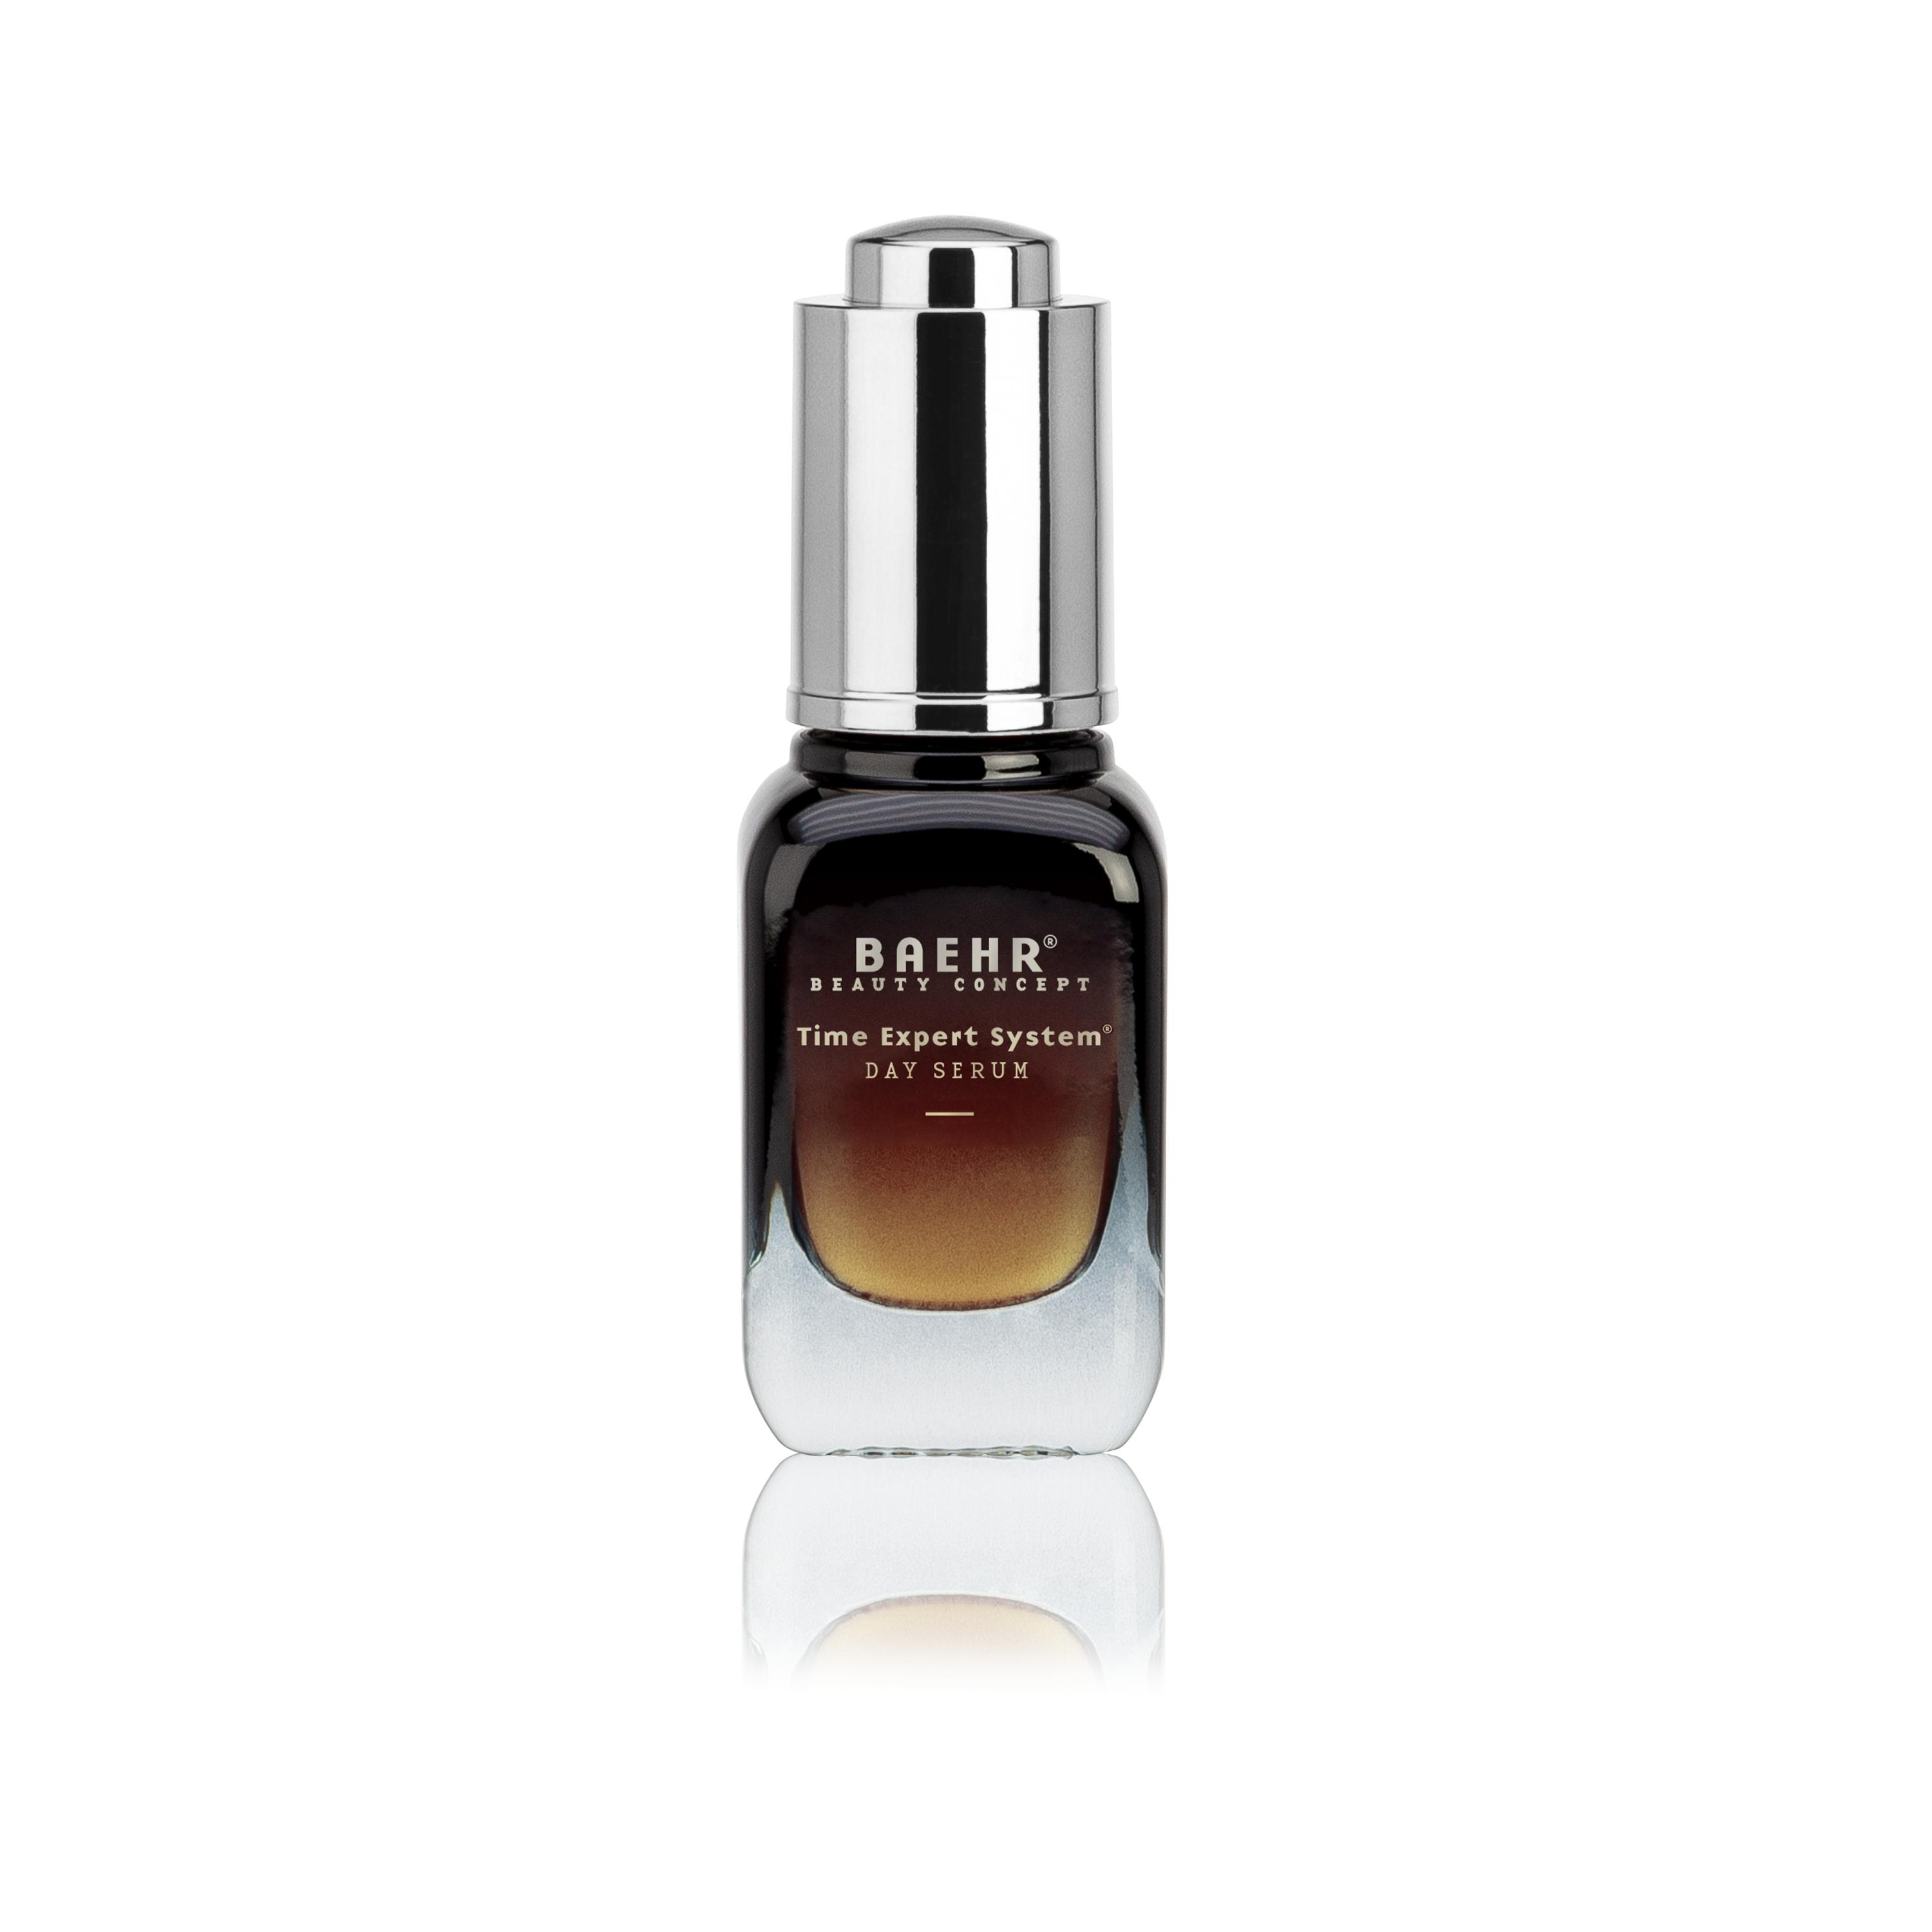 BAEHR BEAUTY CONCEPT Time Expert System | Day Serum 15 ml